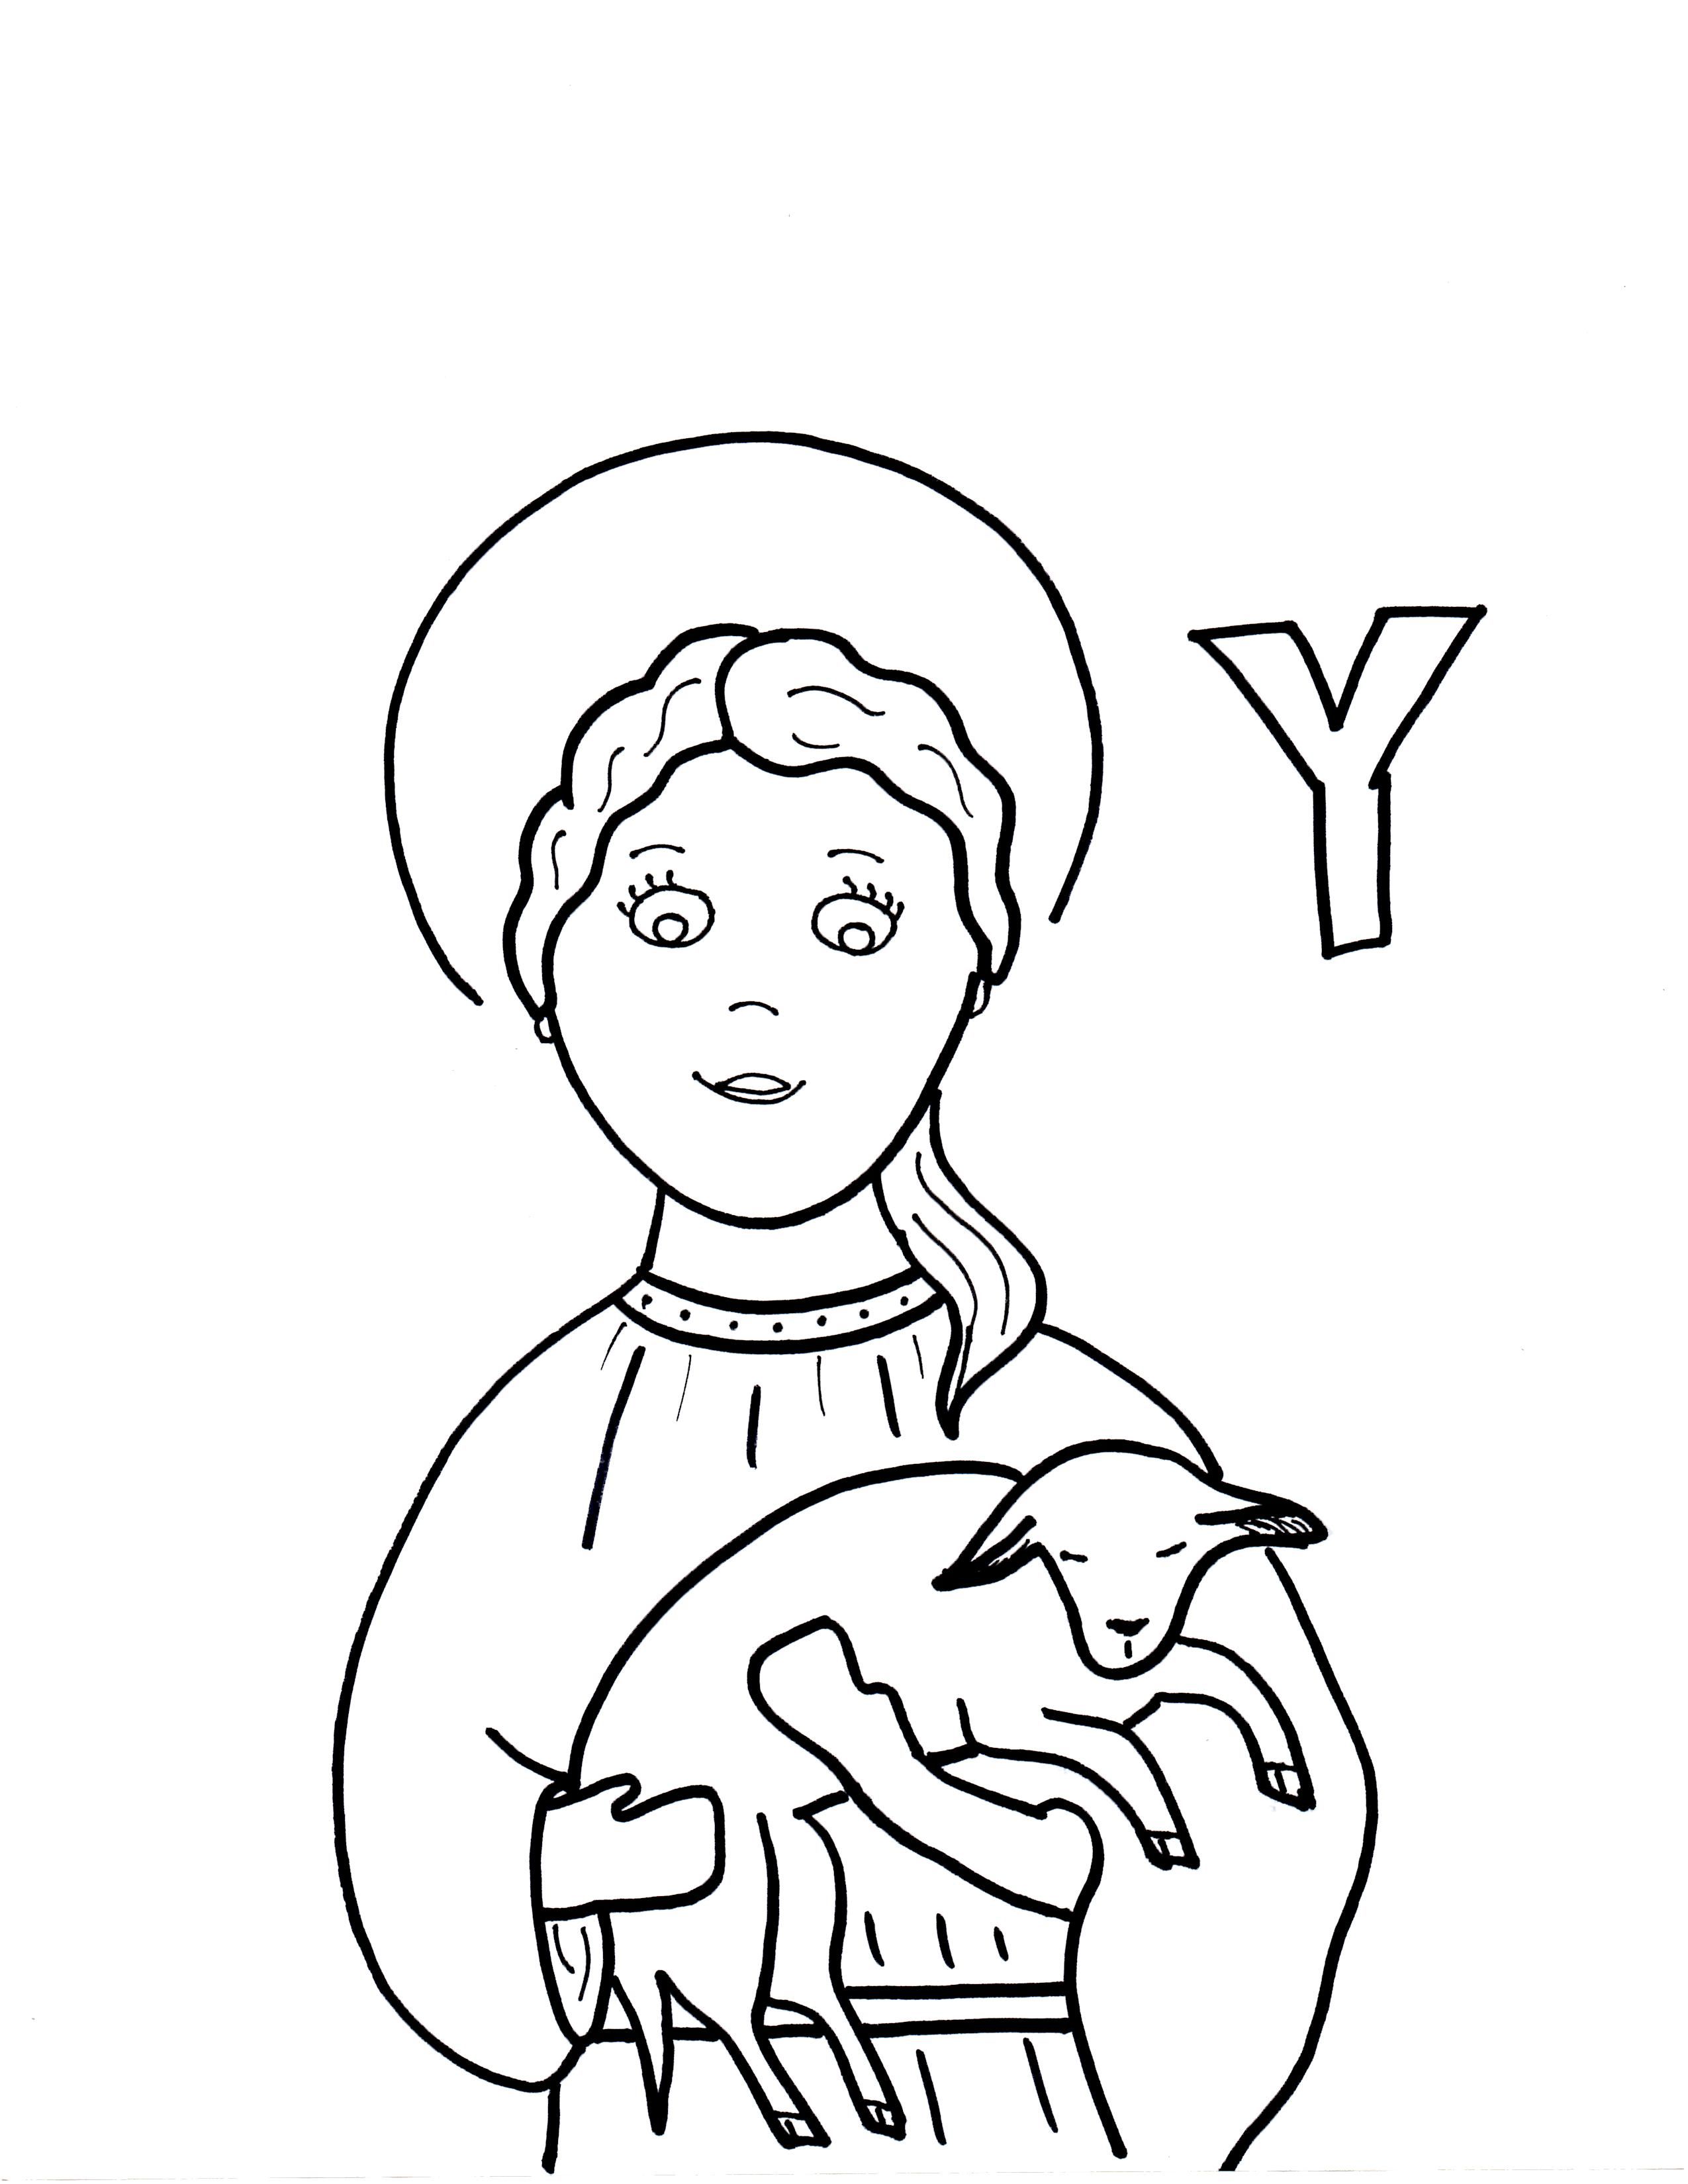 Y is for st ynez agnes mystery of history francis xavier coloring pages